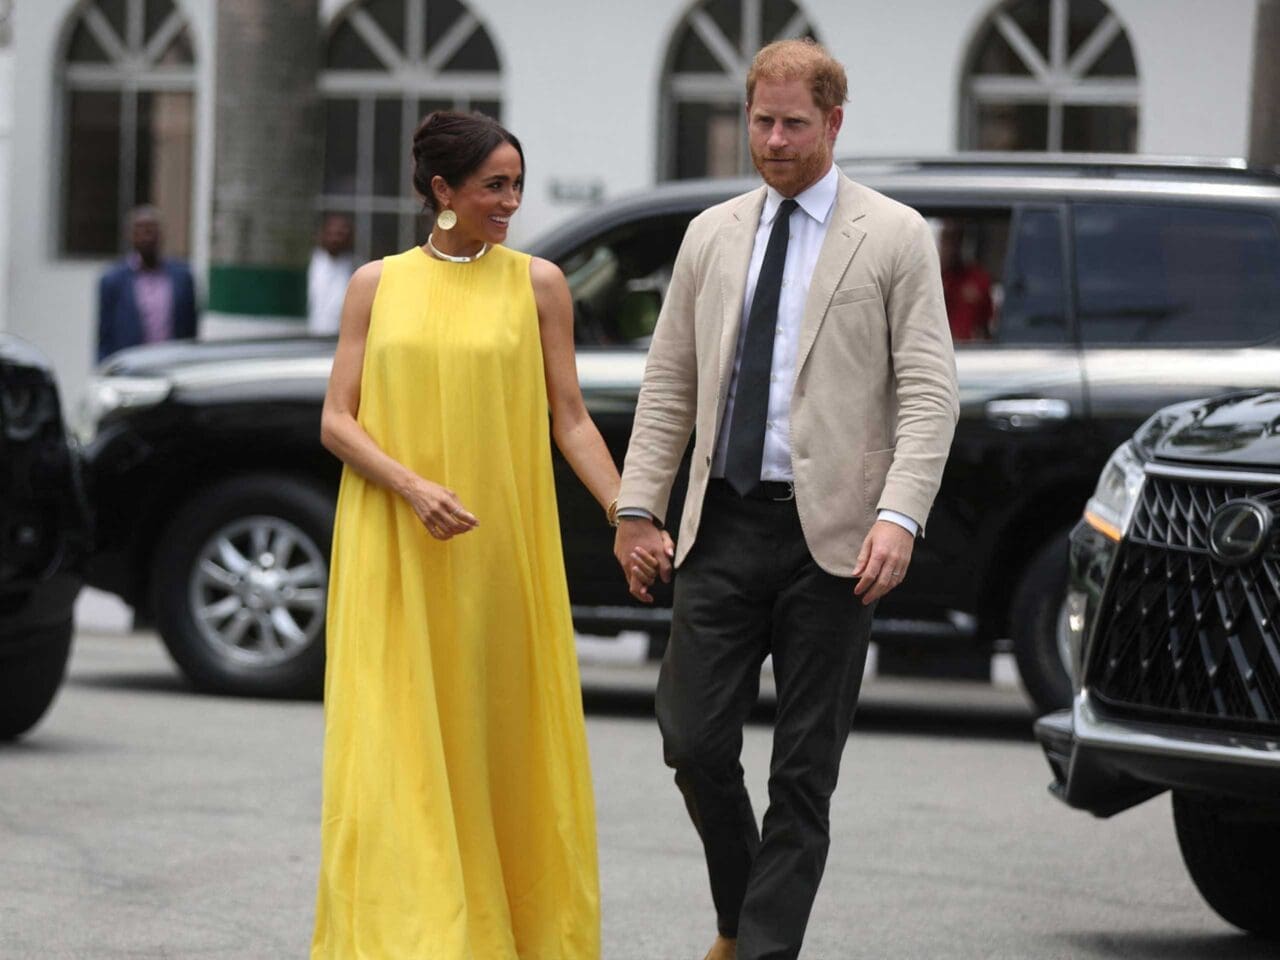 The Duchess of Sussex in Carolina Herrera at the the State Governor House in Lagos. Photo: Kola Sulaimon/Getty Images